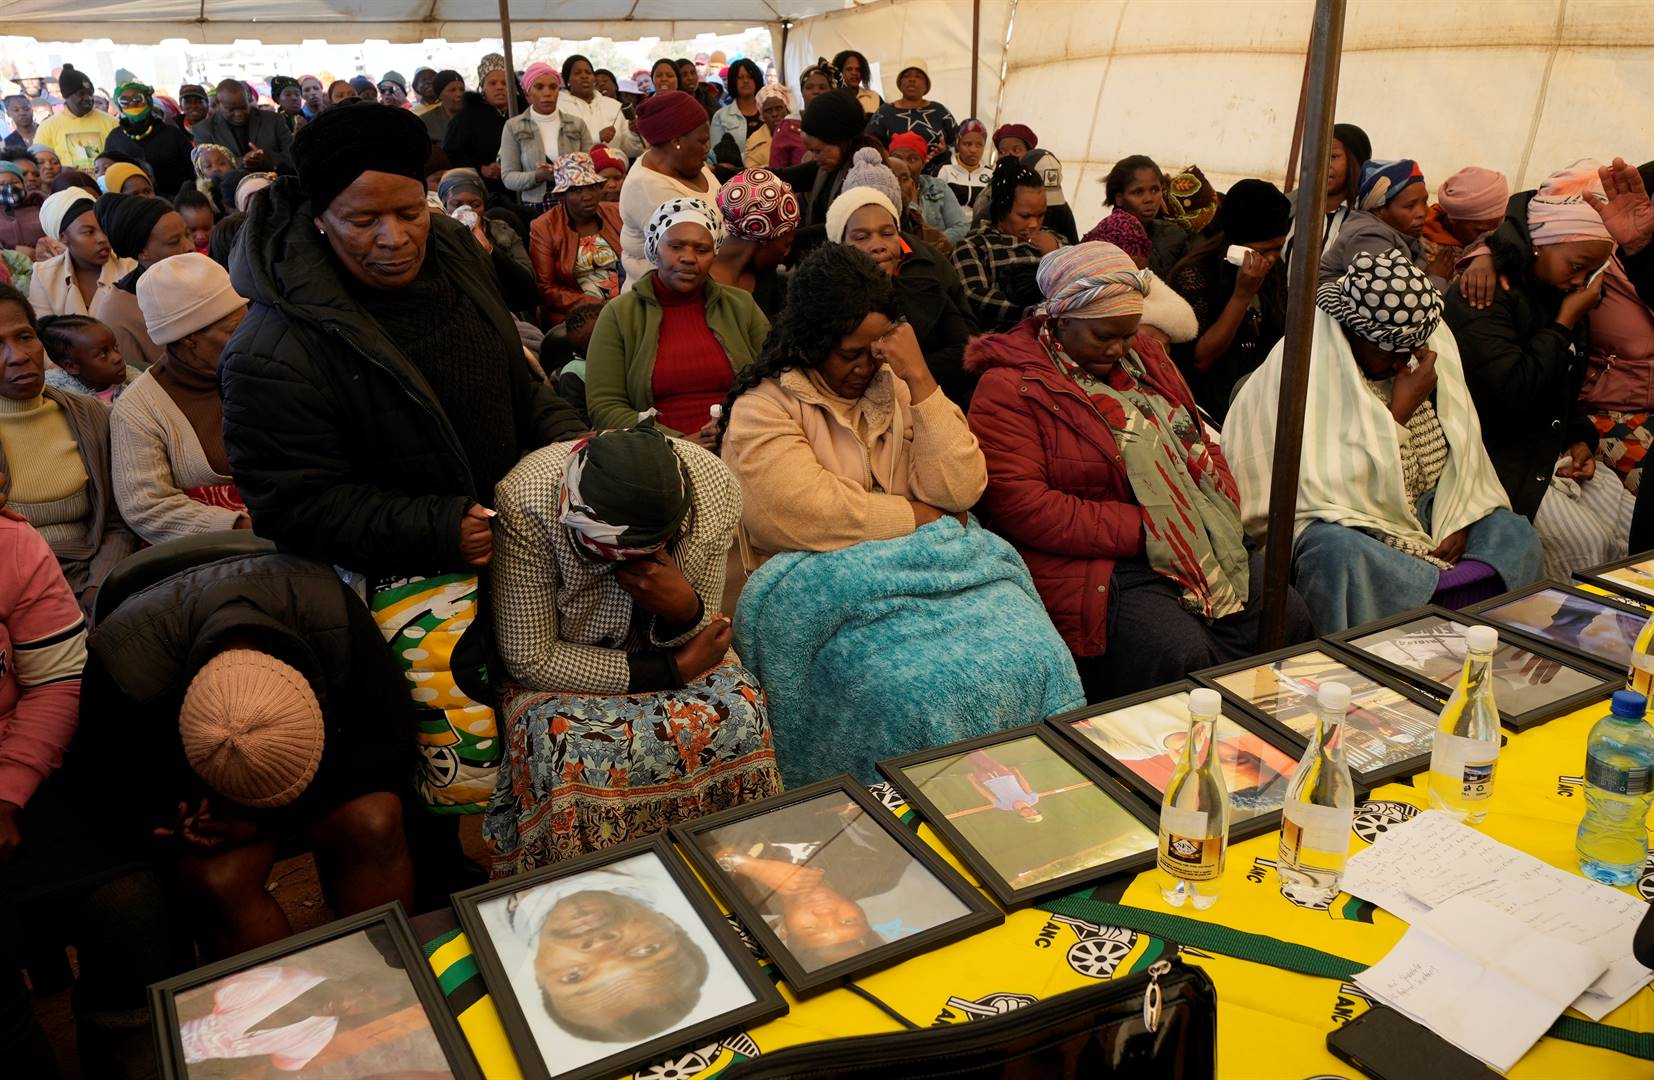 Families members sit in front of displayed photos of their deceased relatives during a memorial service for the 16 victims of the Nomzamo tavern attack , in Nomzamo Park, Soweto, South Africa, Thursday, July 14, 2022. South Africa is reeling in shock from a spate of weekend bar shootings in which armed men burst into three taverns and opened fire indiscriminately, killing people. Photo: AP Photo/Themba Hadebe